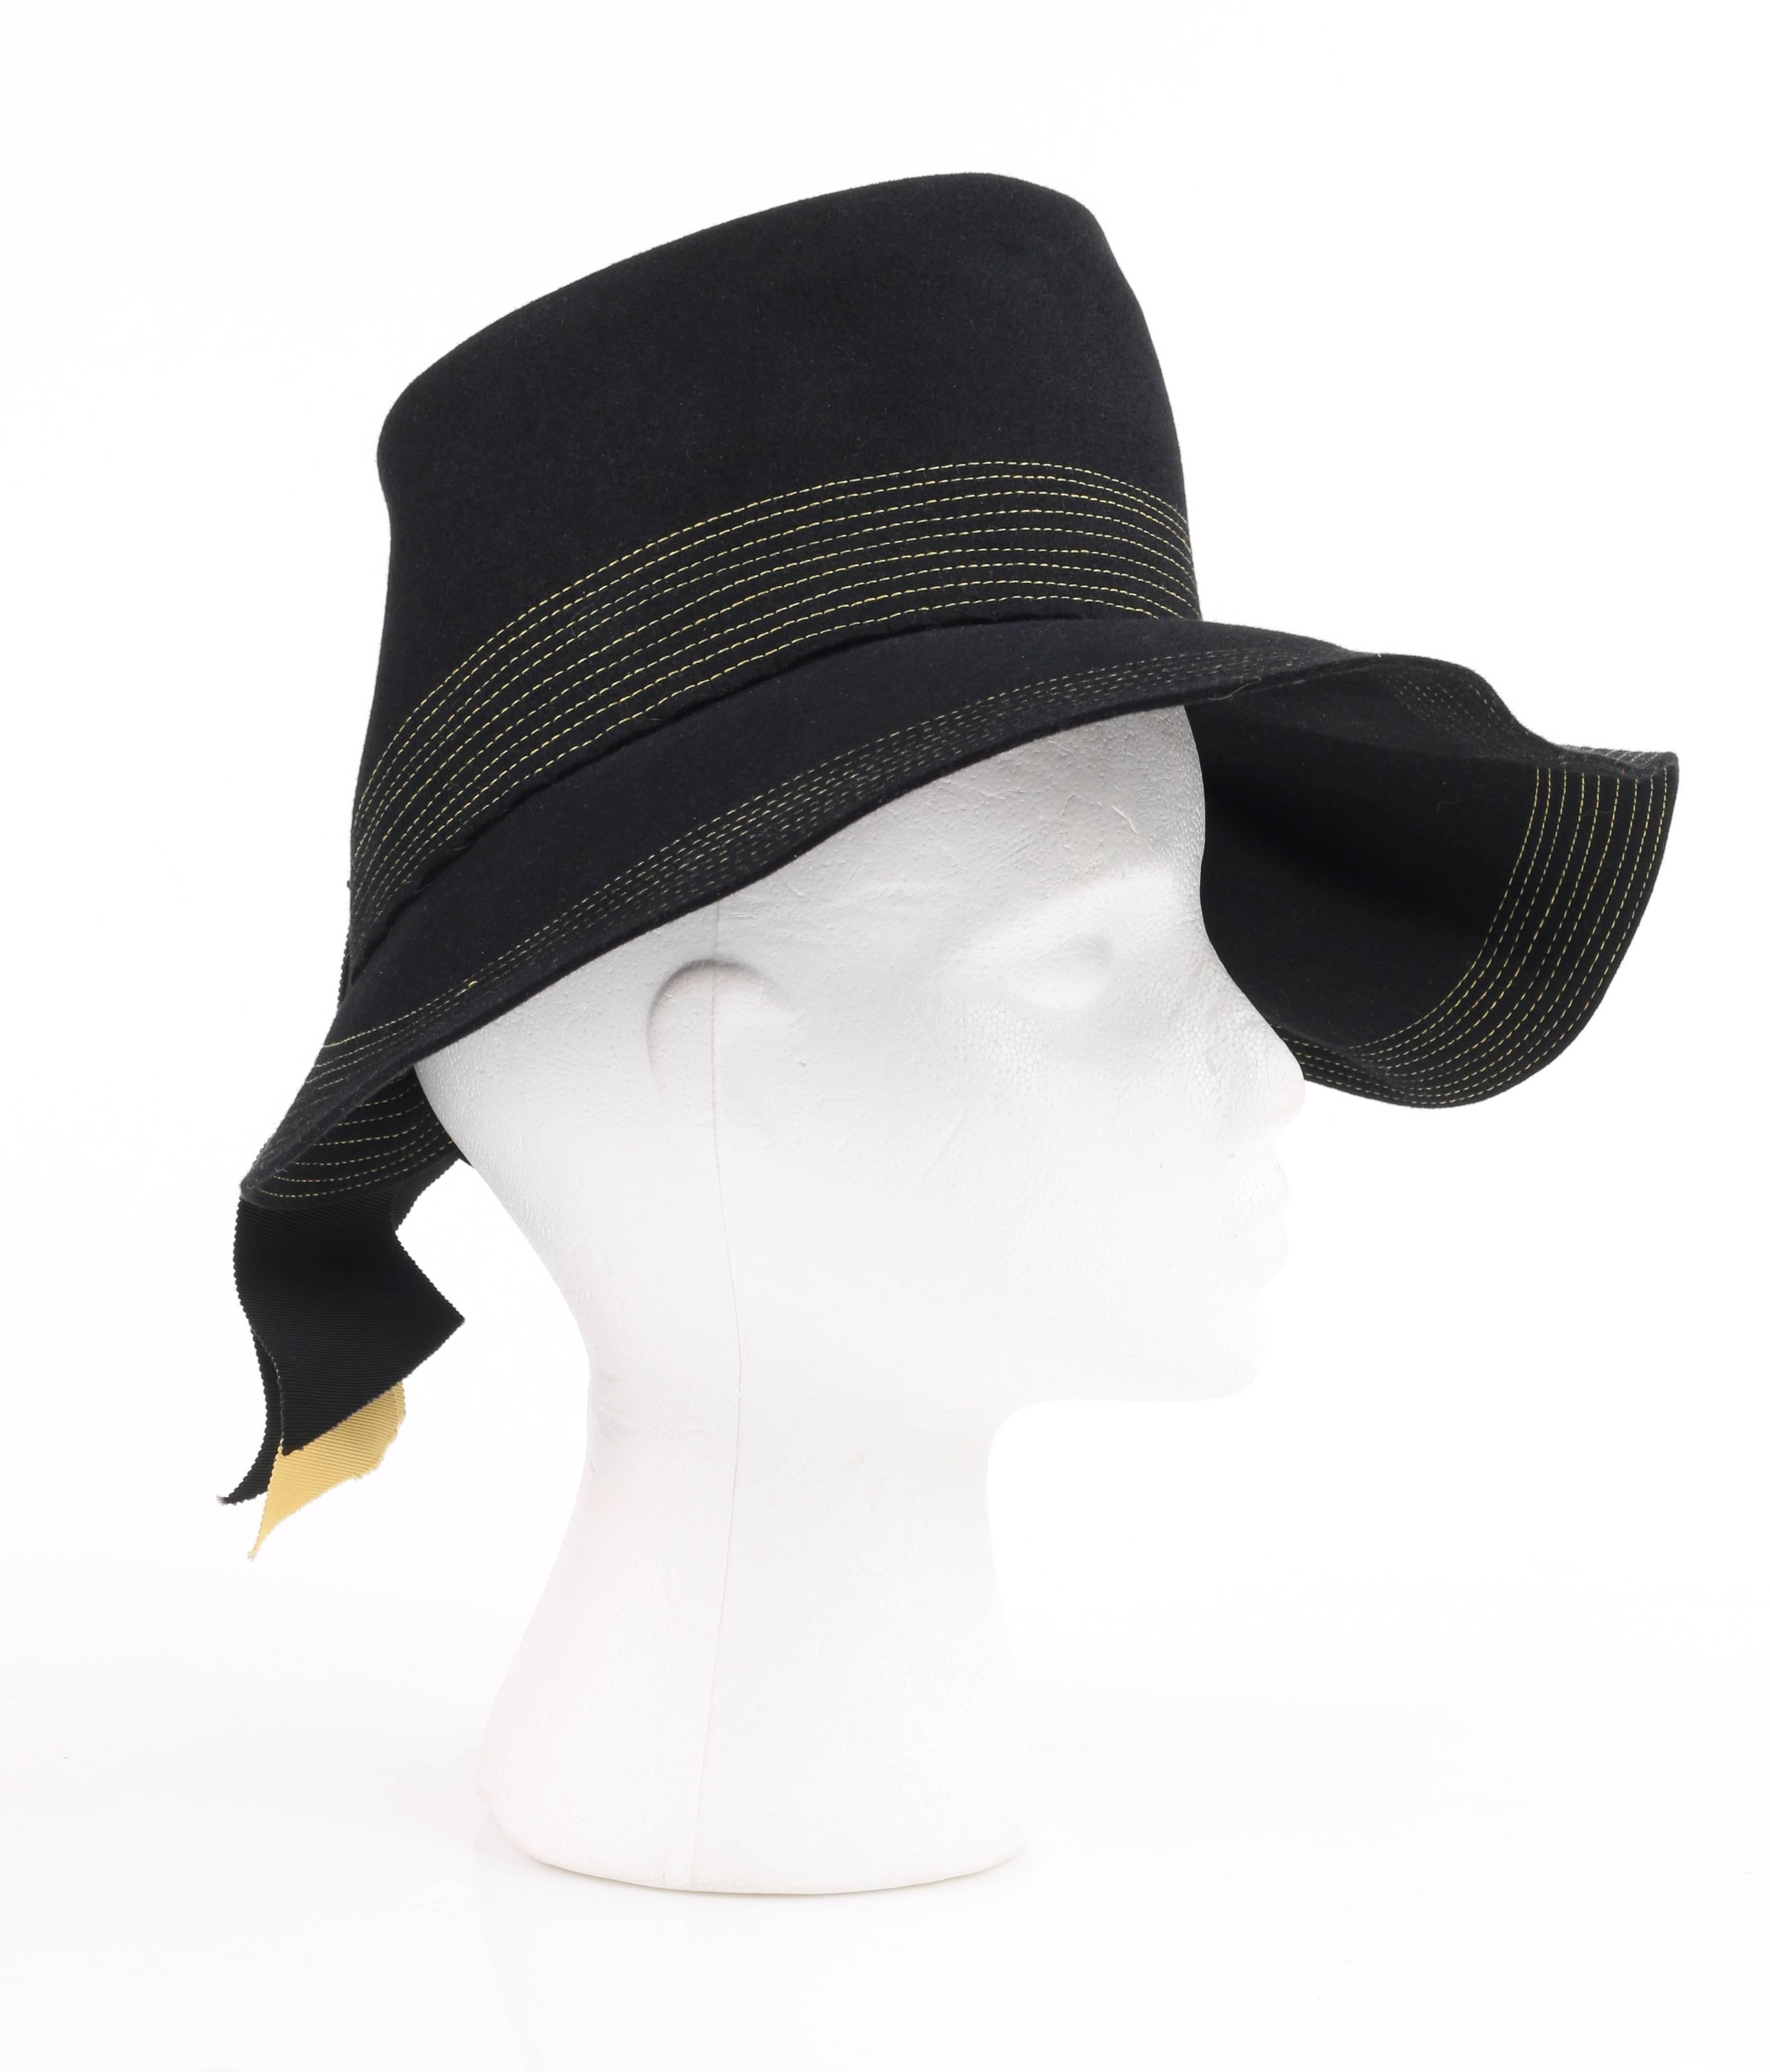 norman durand hats